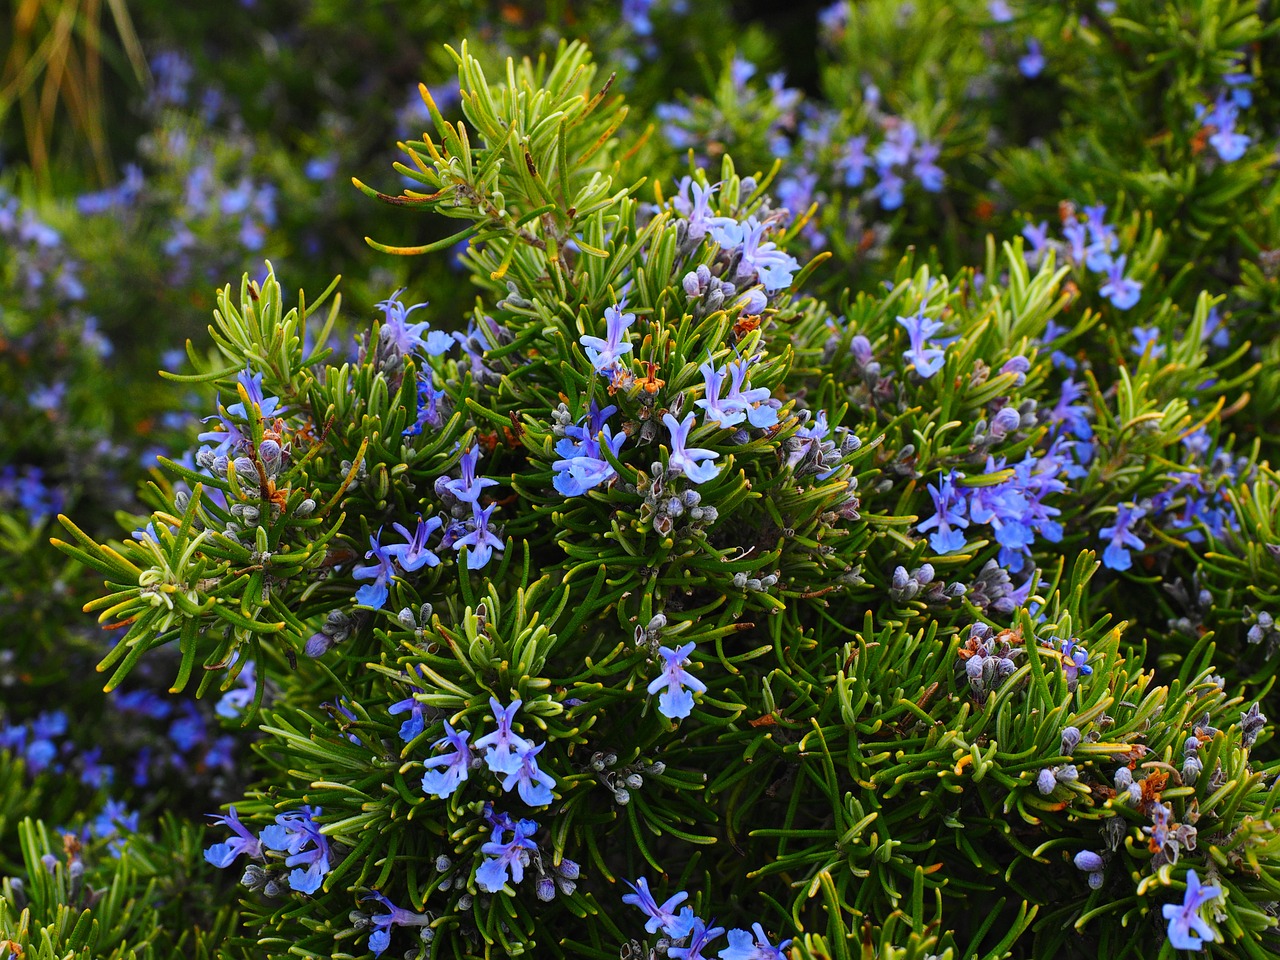 Boost your overall health with rosemary, a great source of antioxidants (recipe included)